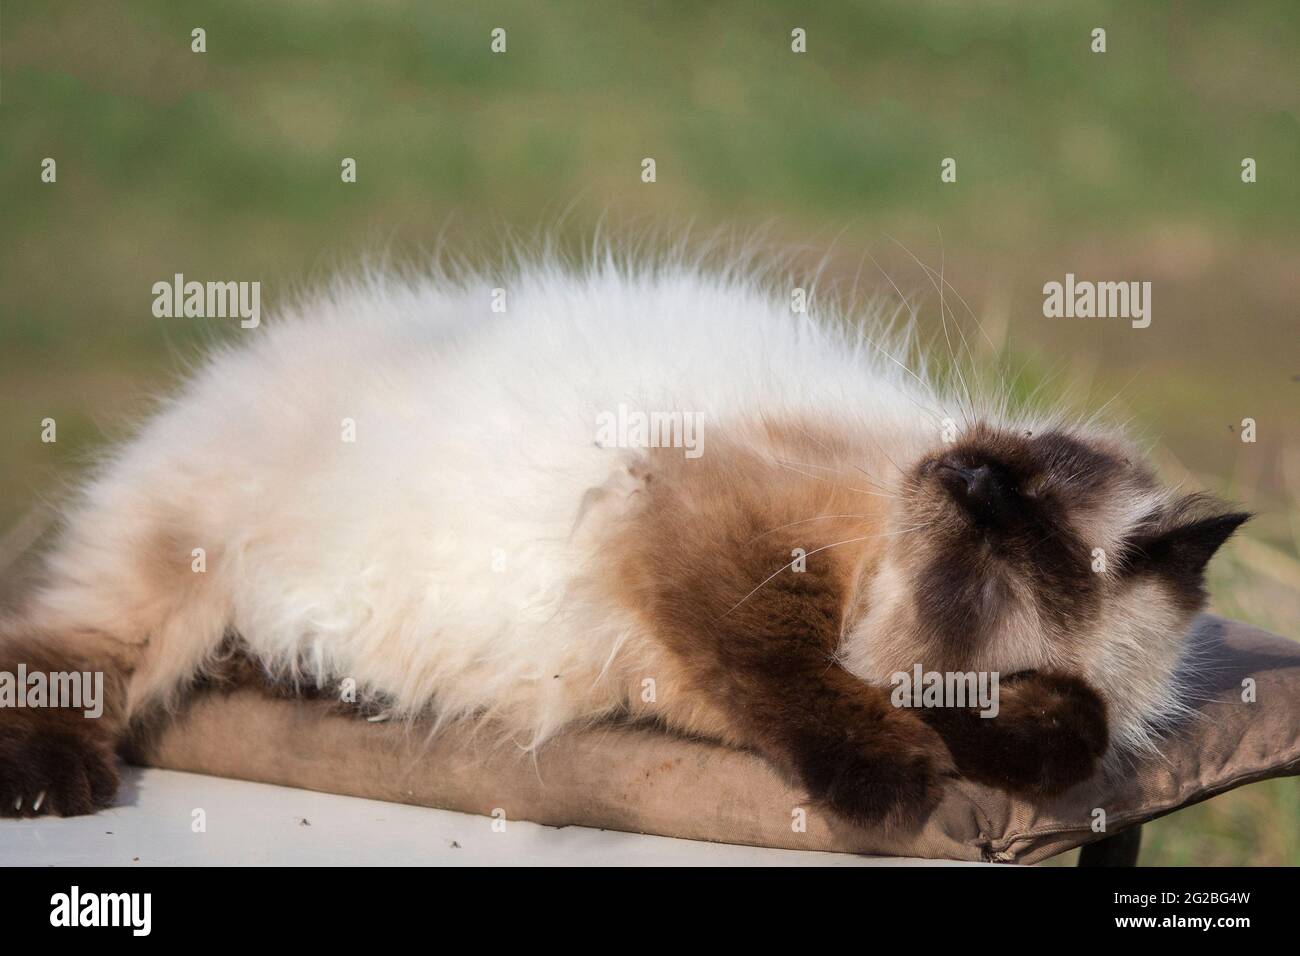 Sleeping cat in funny pose Stock Photo